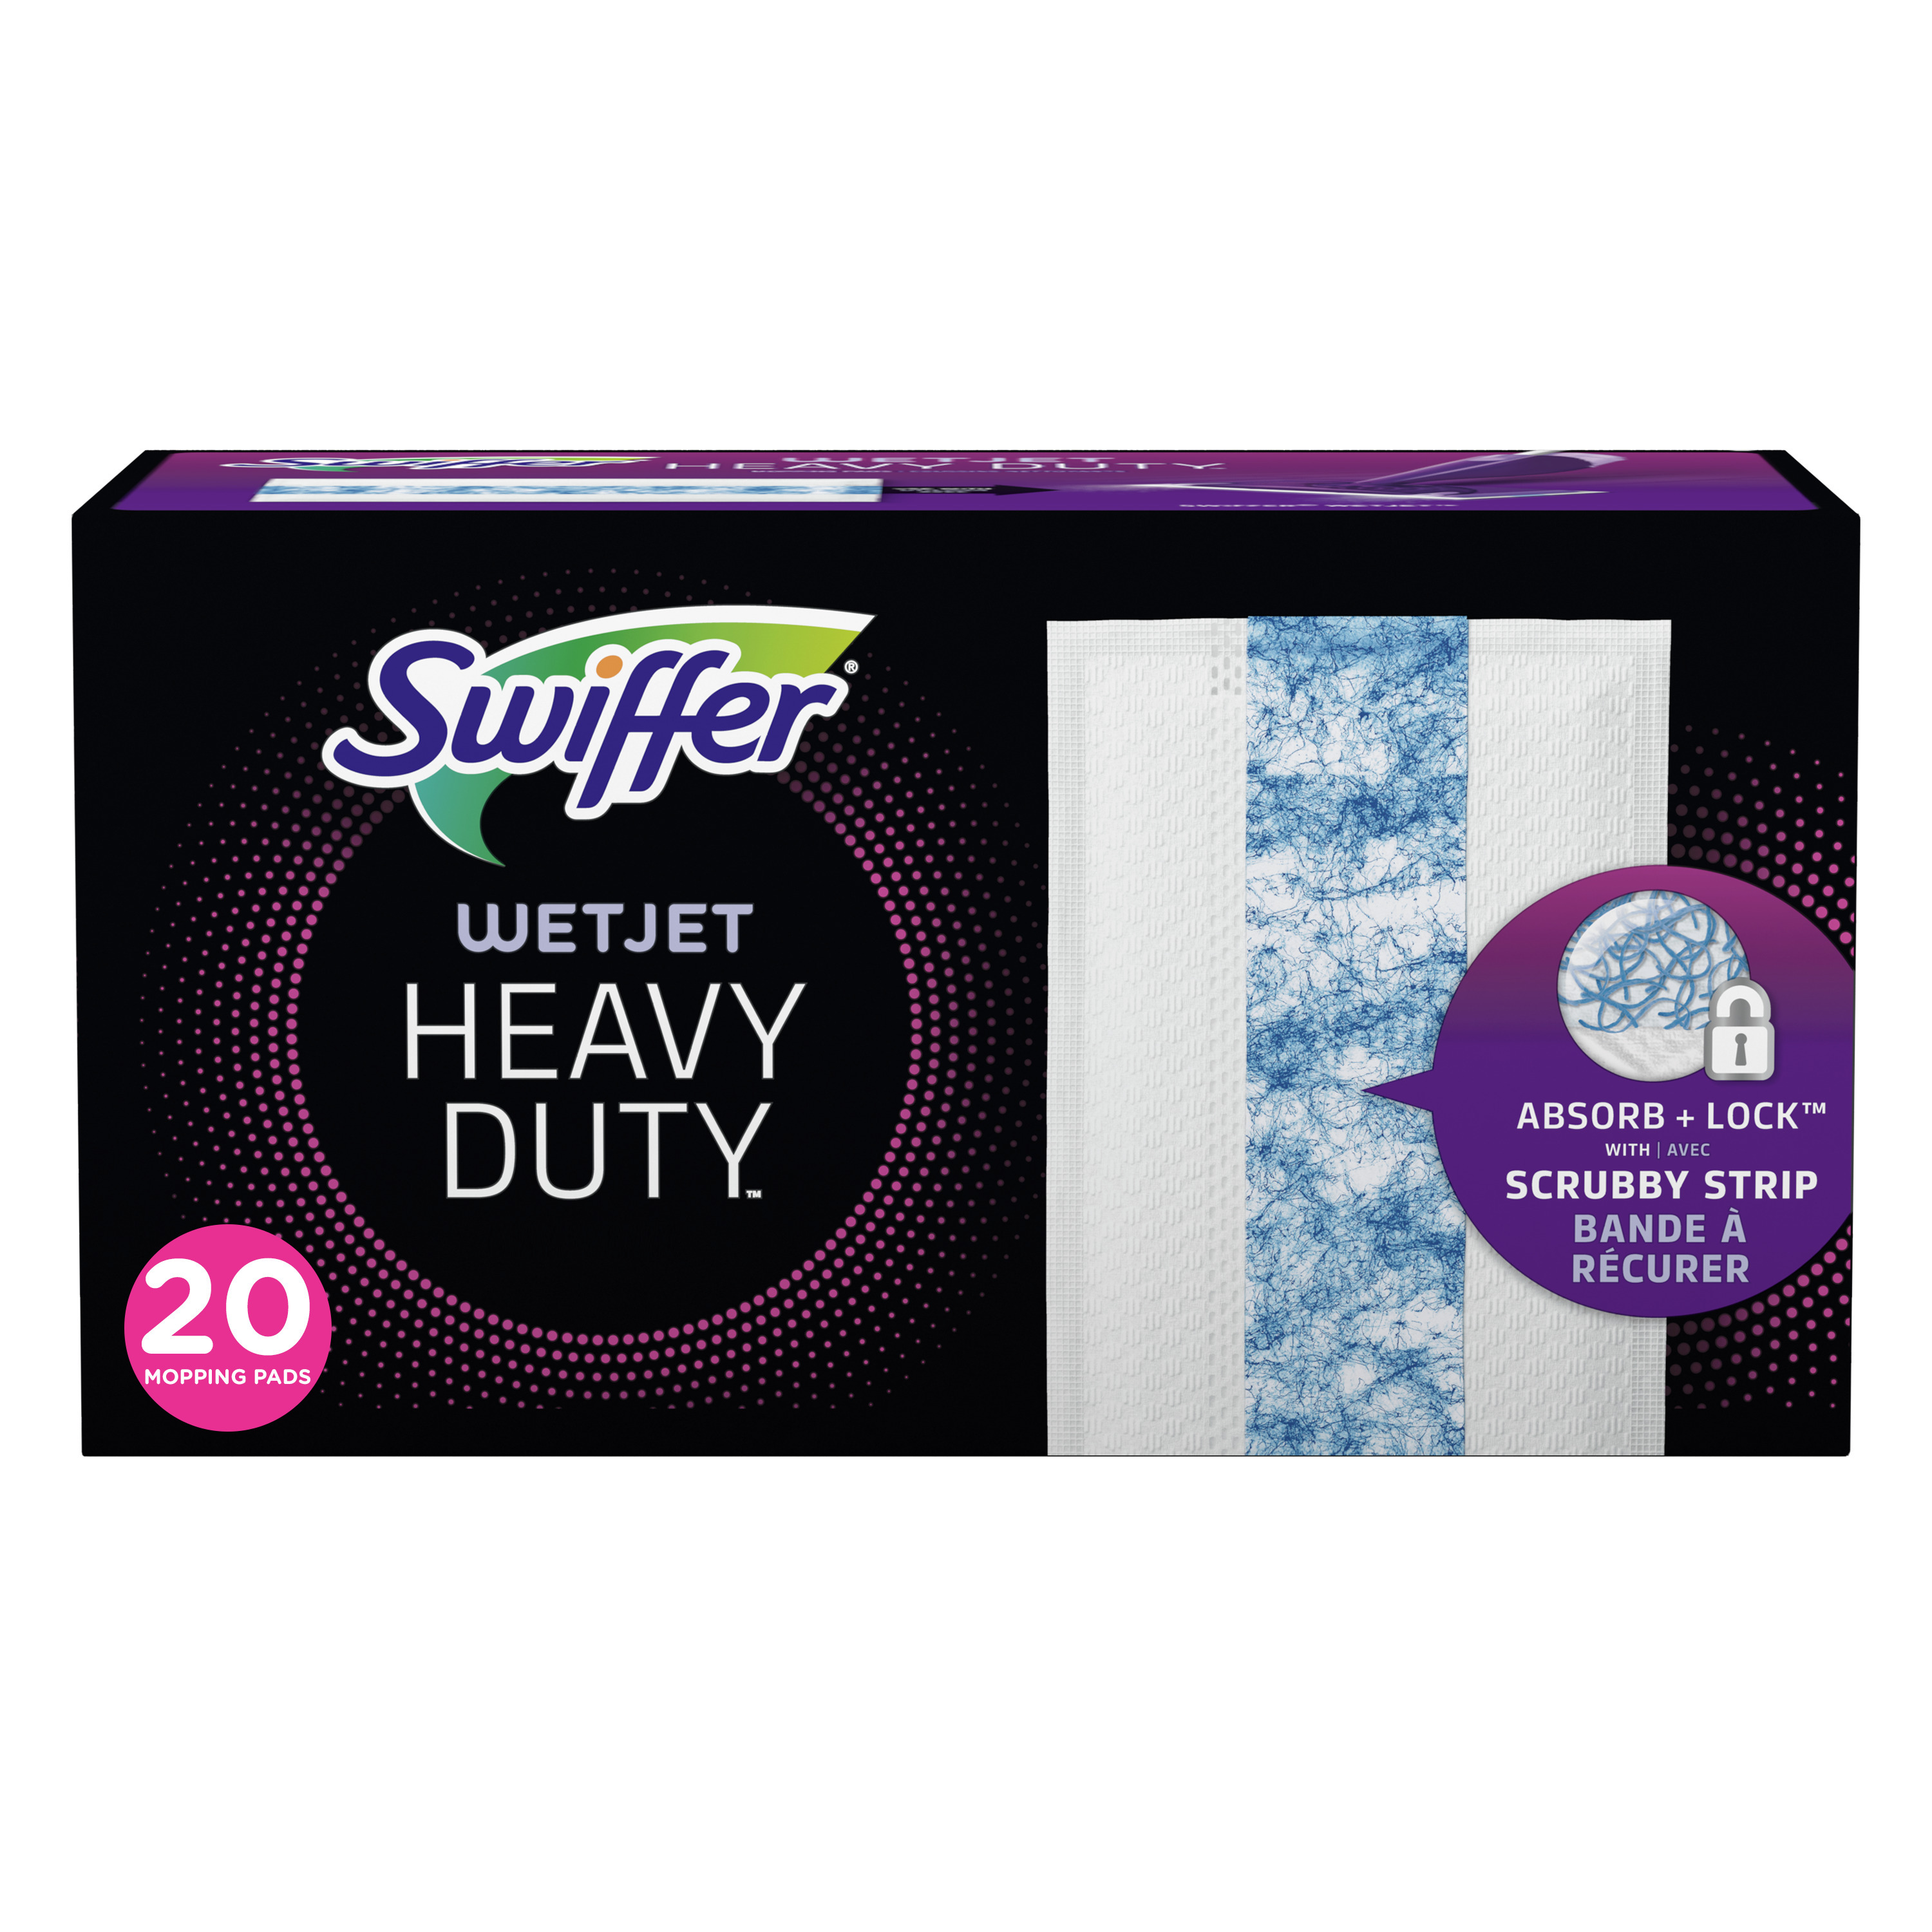 Swiffer WetJet Spray Mop Heavy Duty Mop Refills for Floor Mopping and Cleaning, All Purpose Multi-Surface Floor Cleaning Pads, 20 Count - image 1 of 10